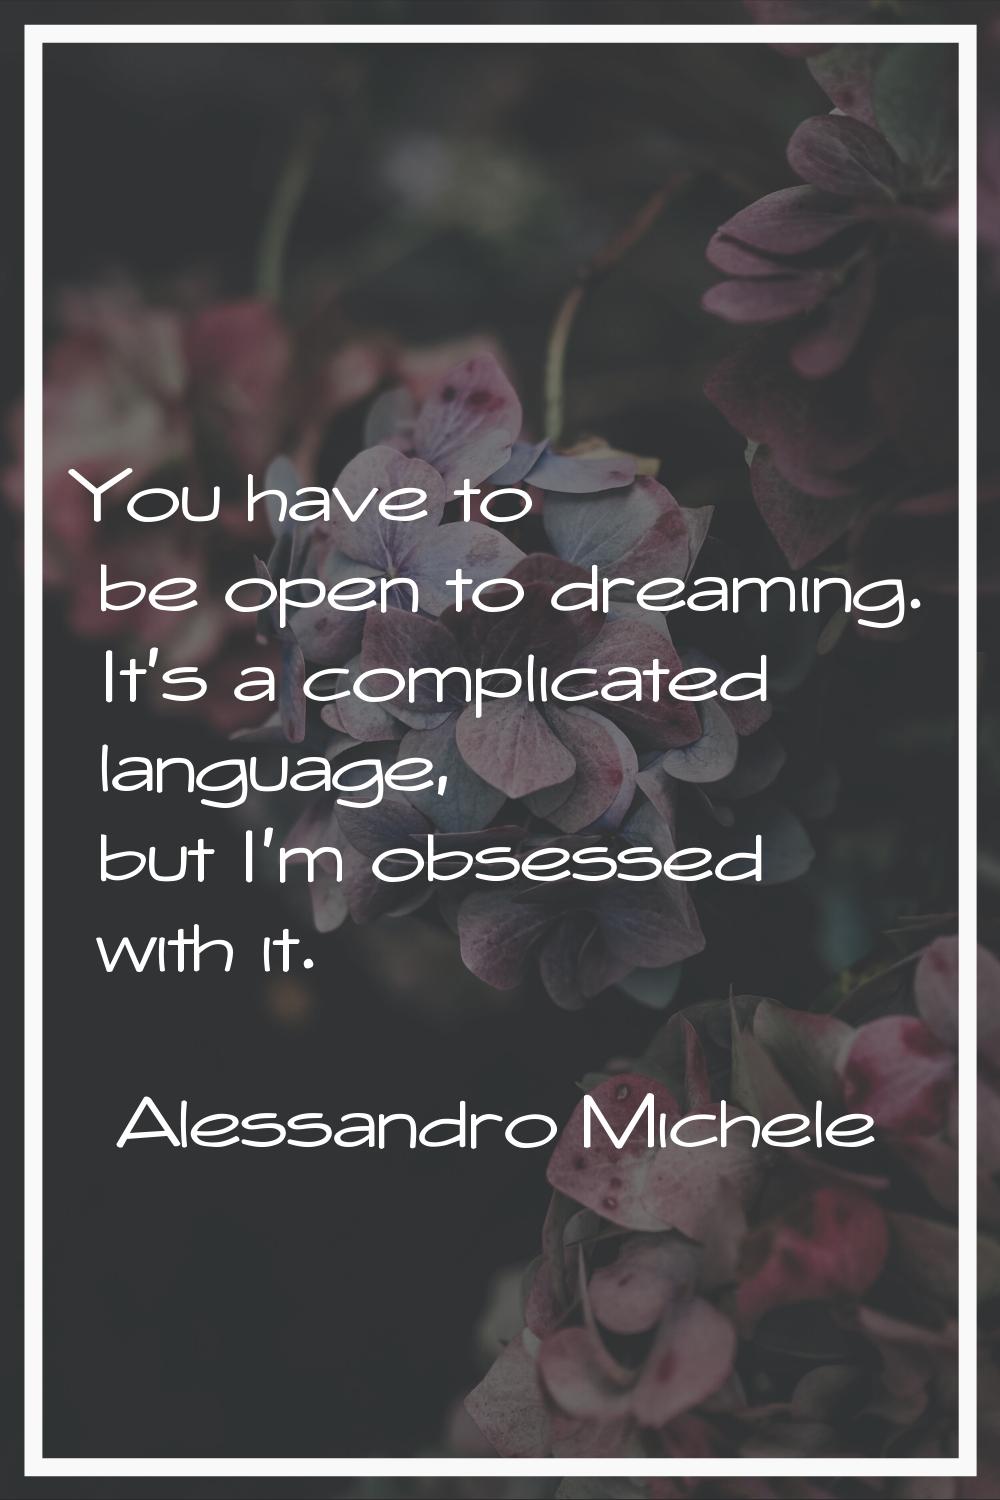 You have to be open to dreaming. It's a complicated language, but I'm obsessed with it.